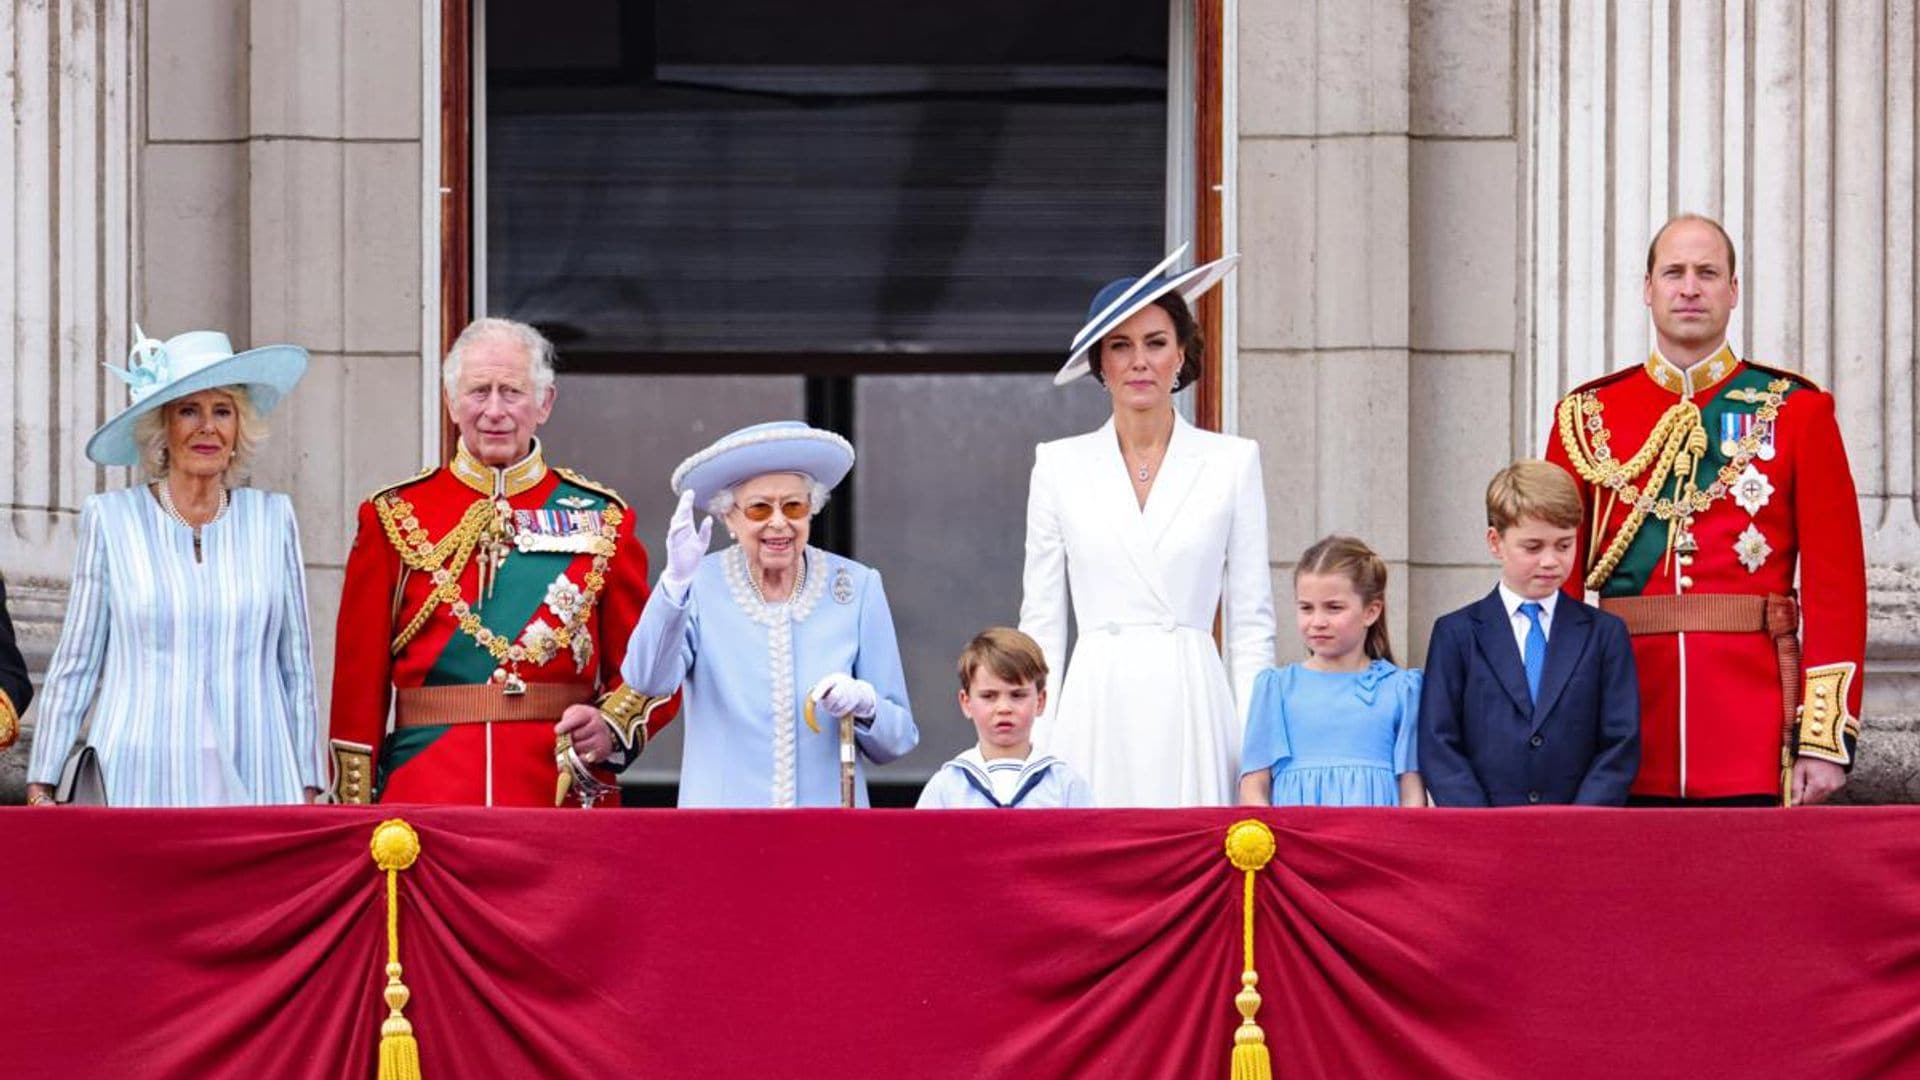 The Royal Family joins Queen Elizabeth at Trooping the Colour ceremony